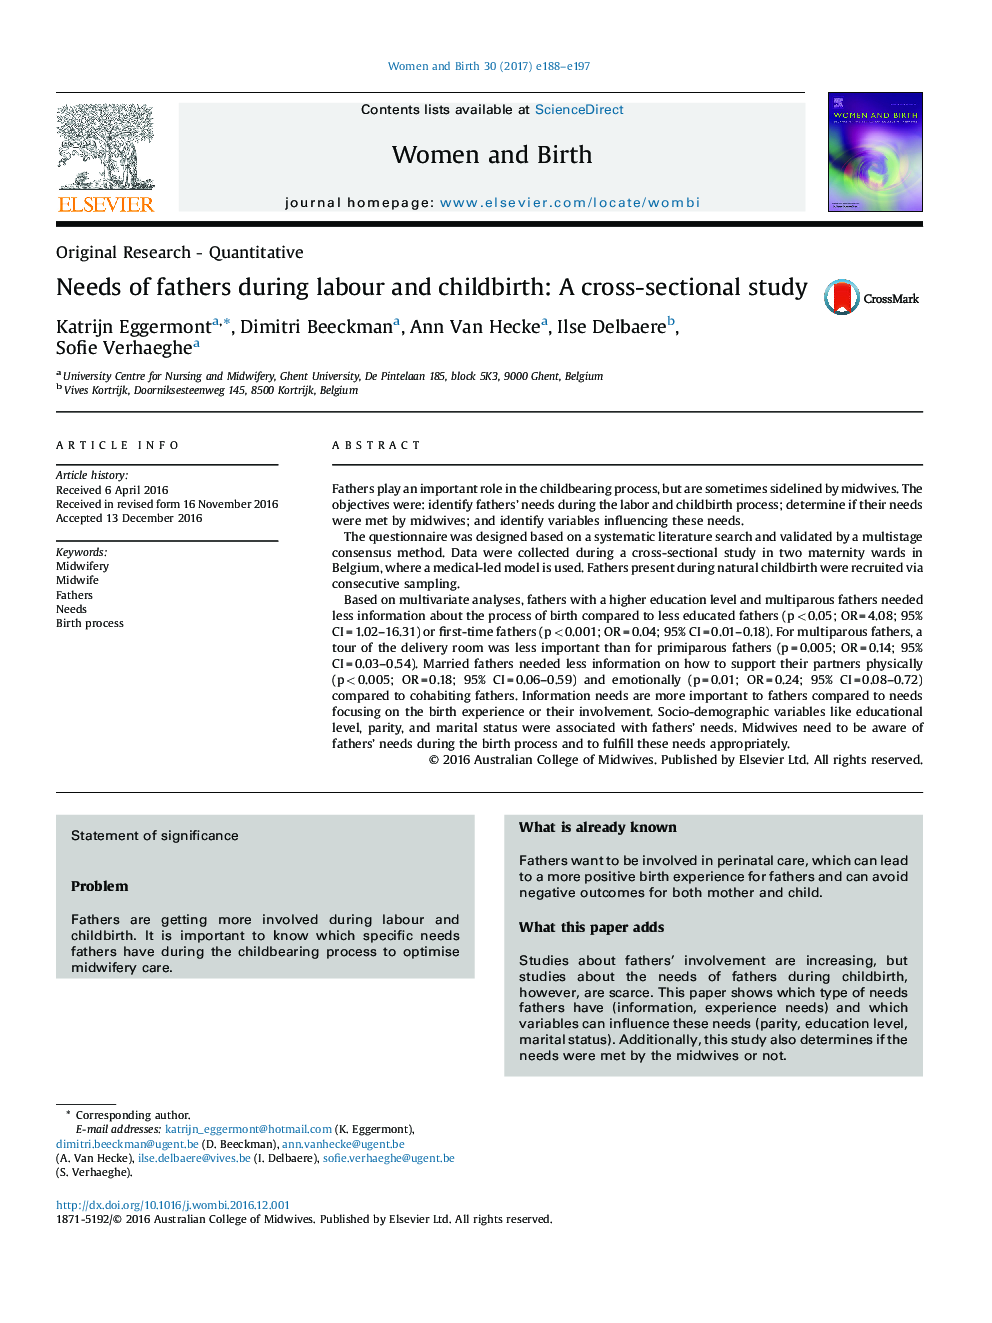 Needs of fathers during labour and childbirth: A cross-sectional study